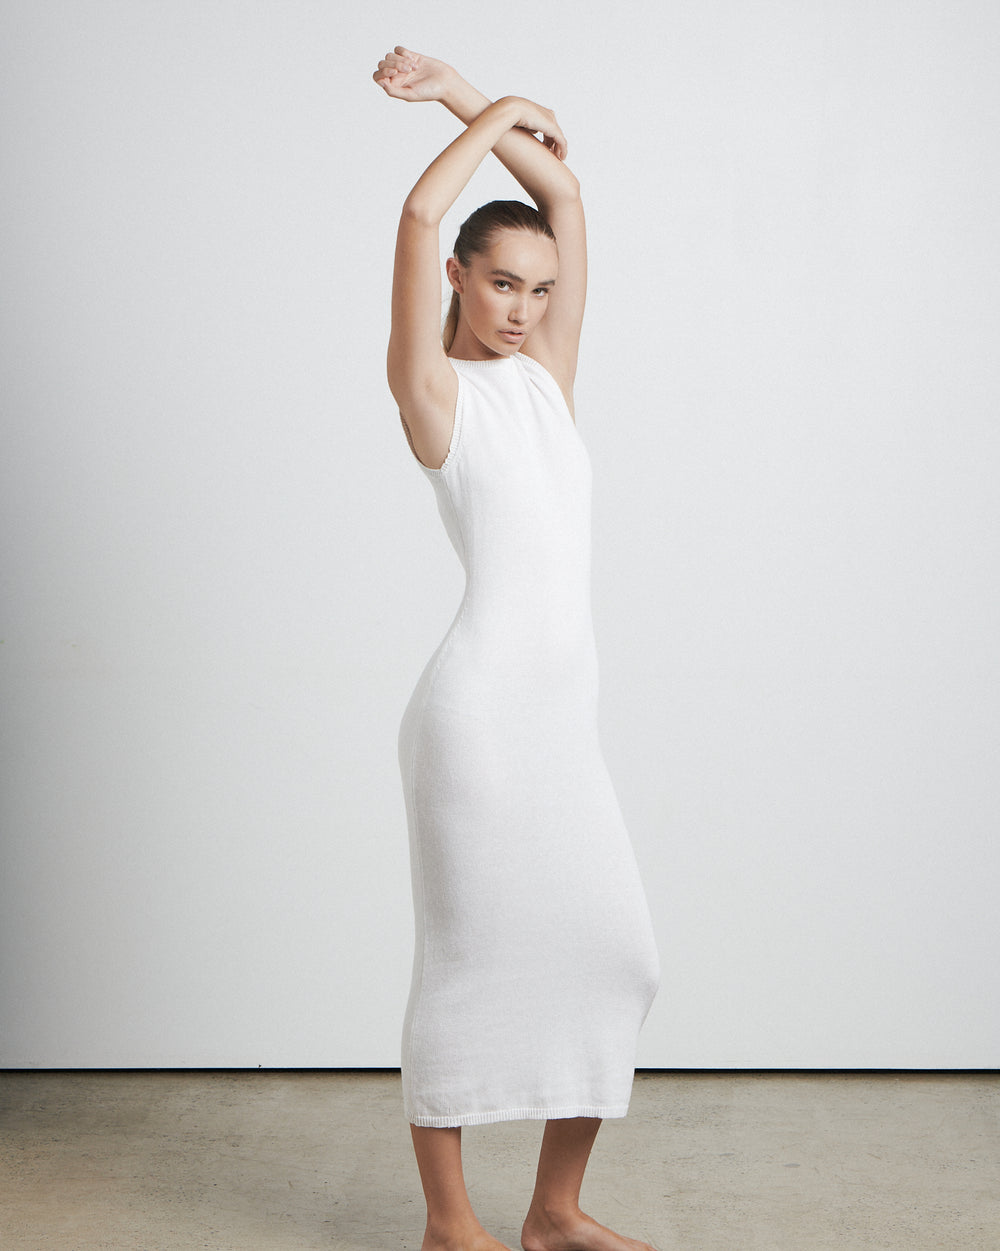 The Knitted Midi Dress